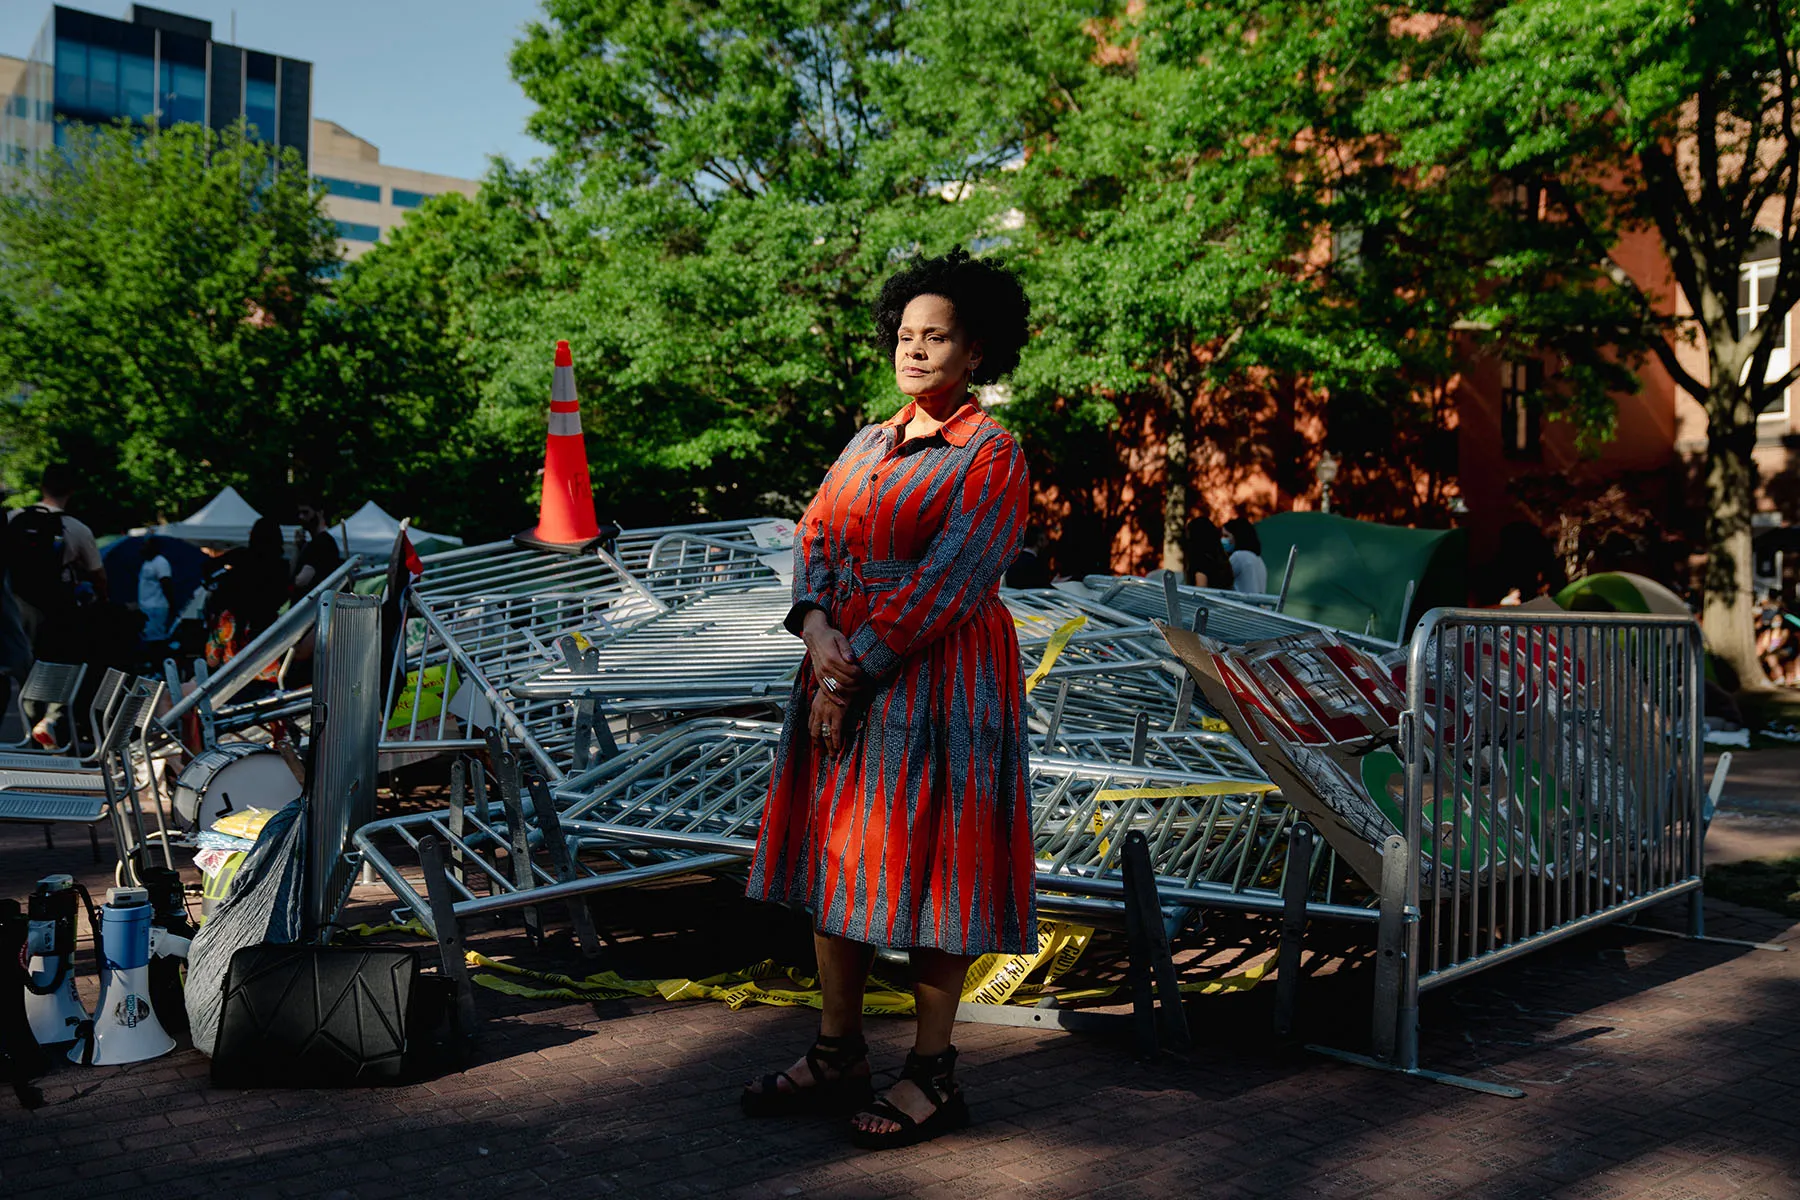 Jennifer James poses for a portrait in front of barricades stacked on top of each other.